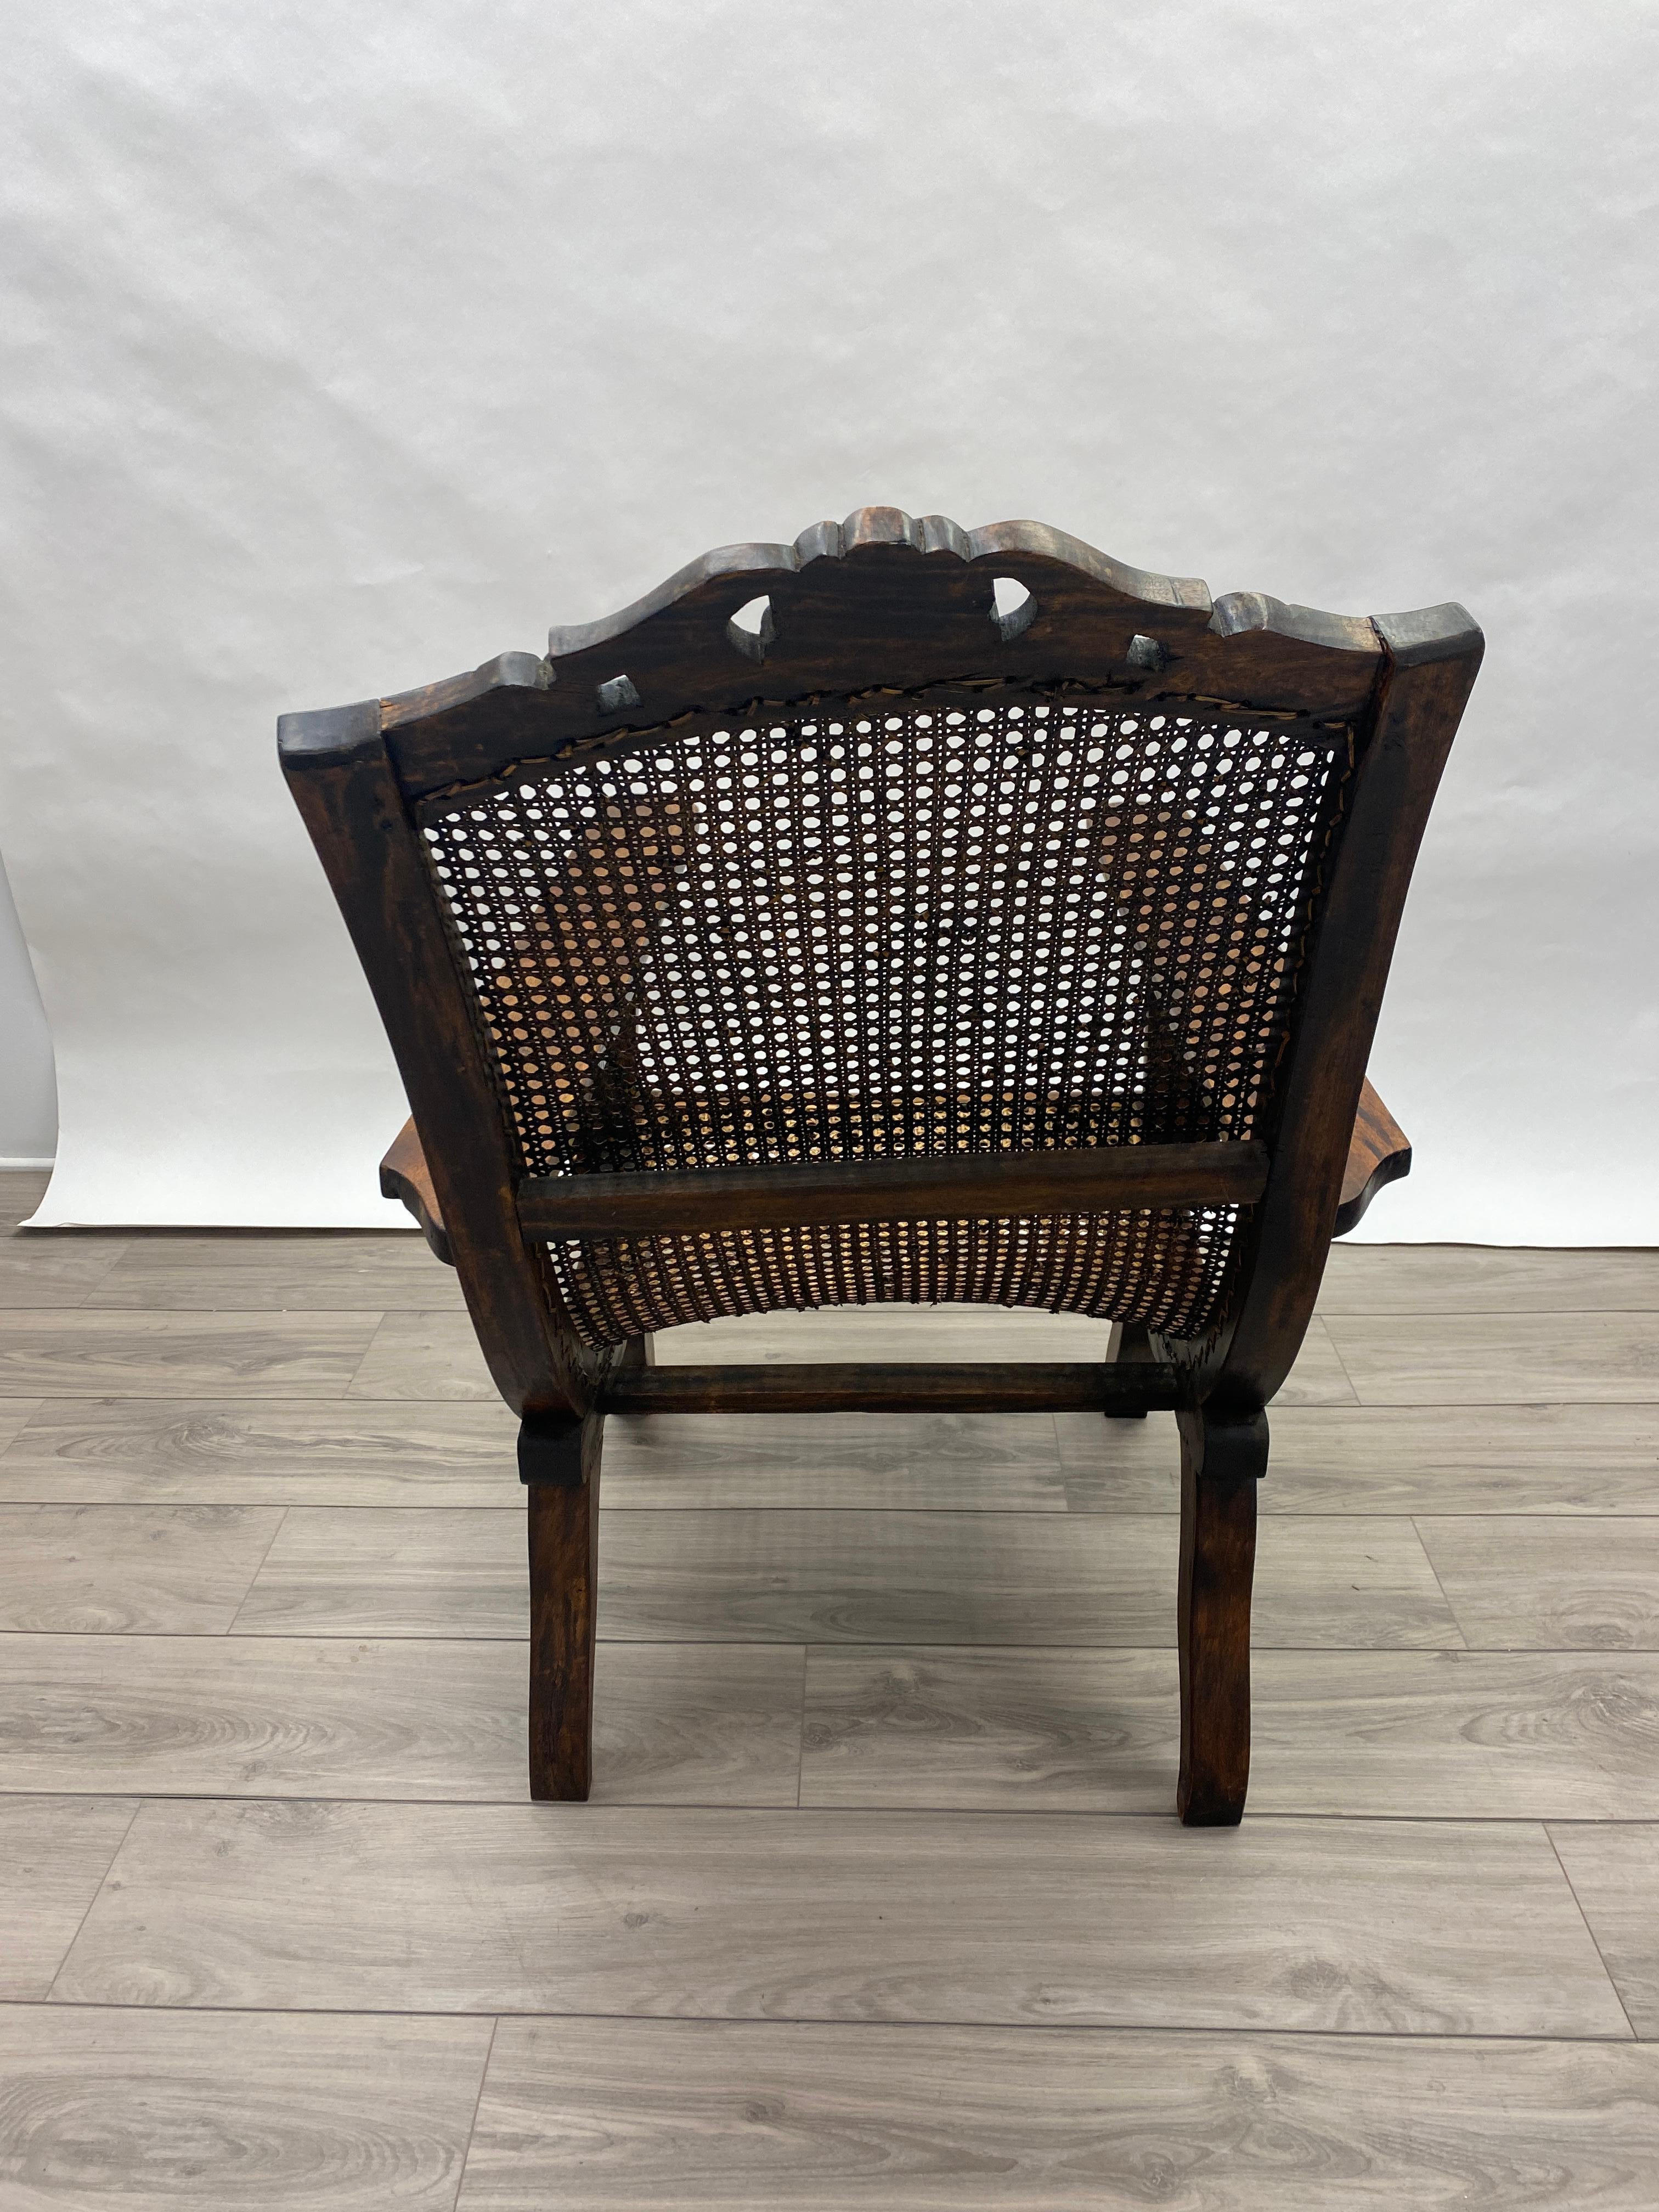 Hand-Crafted 19th Century English Colonial Teak Plantation Chair